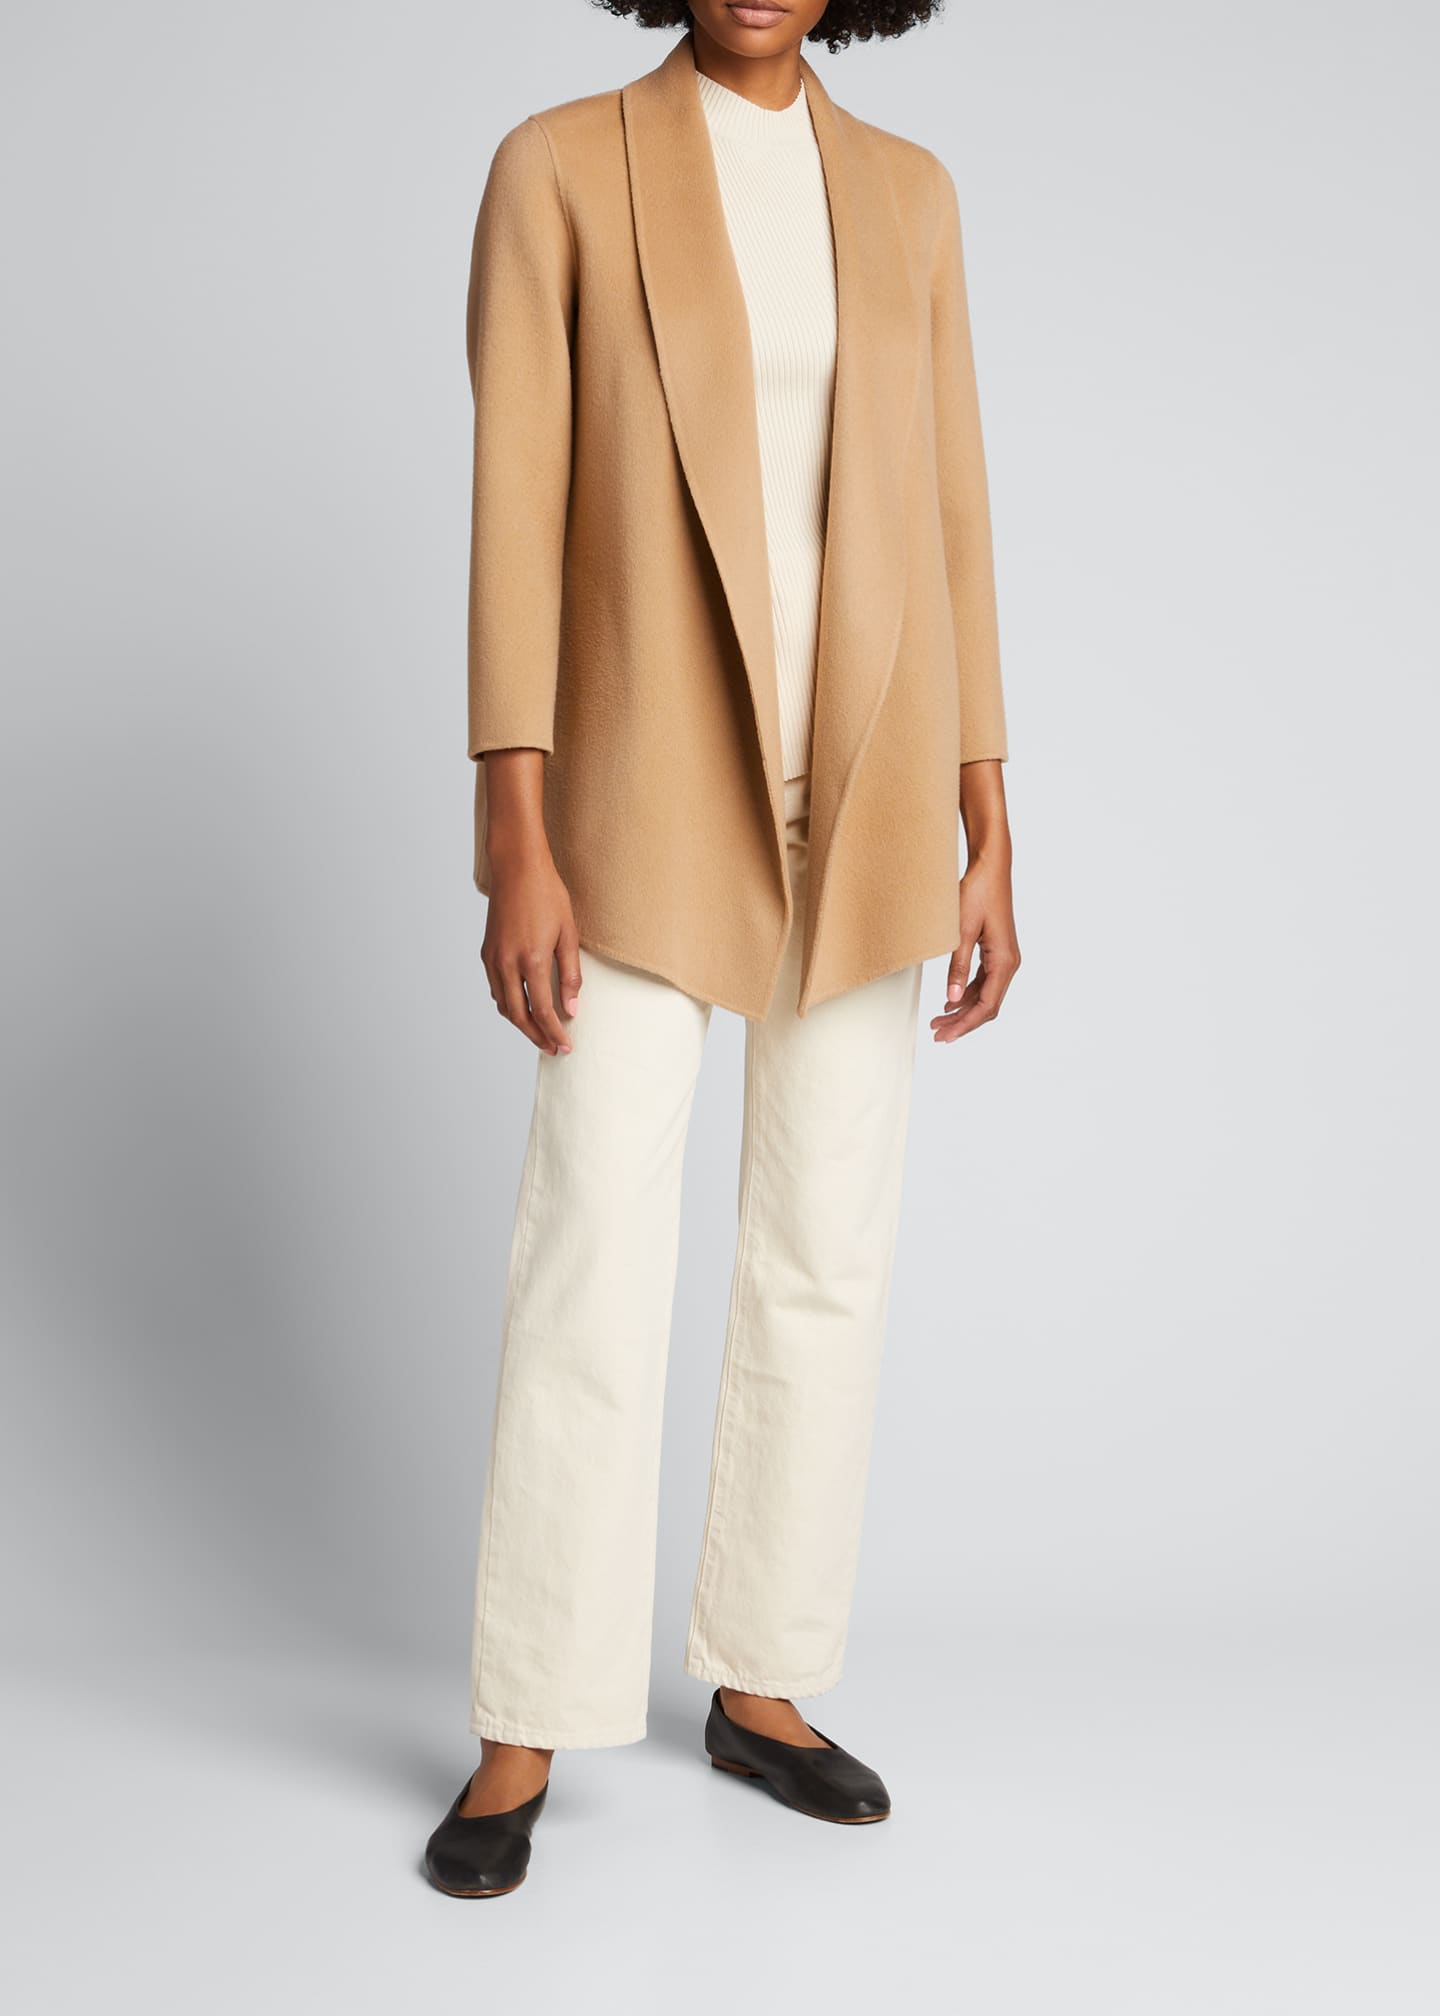 Theory Clairene Double-Face Wool-Cashmere Jacket - Bergdorf Goodman